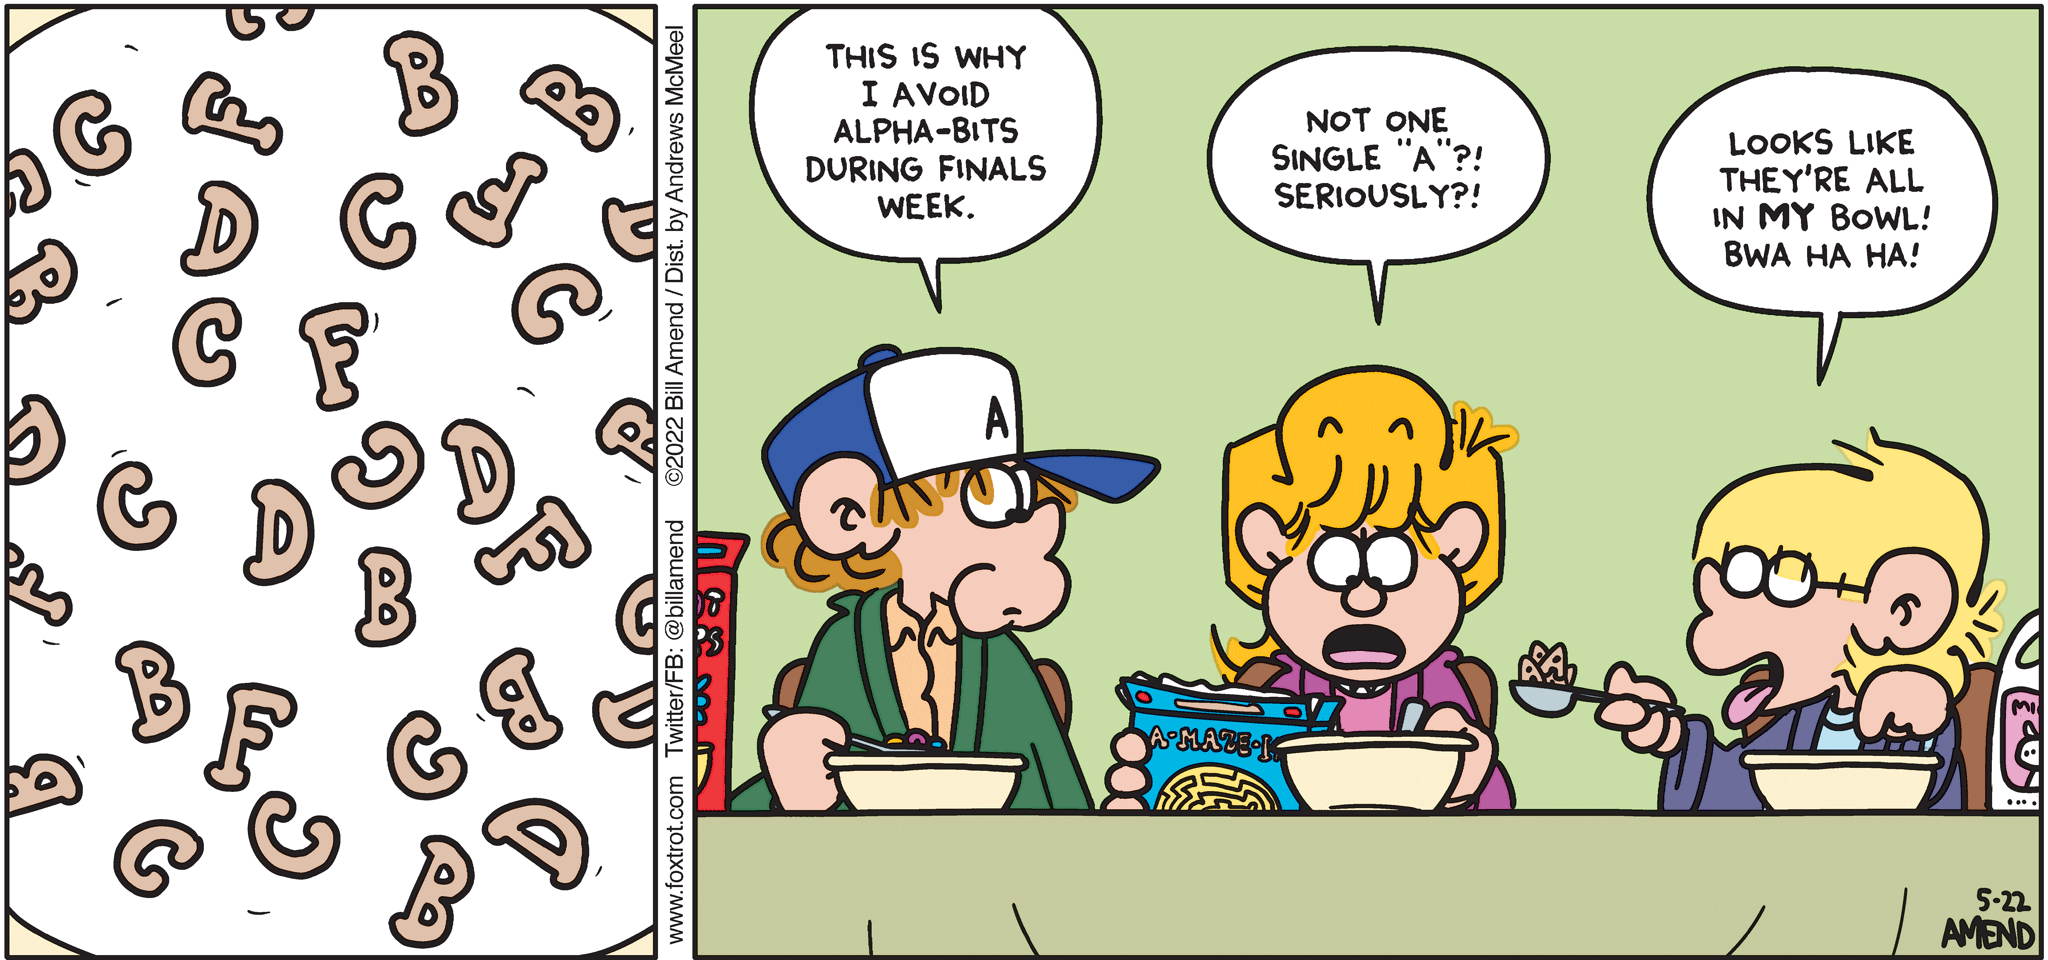 FoxTrot comic strip by Bill Amend - "They’re Gr-r-rades!" published May 22, 2022 - Transcript: Peter Fox: This is why I avoid Alpha-Bits during finals week. Paige Fox: Not one single "A"?! Seriously?! Jason Fox: Looks like they're all in MY bowl bwa ha ha!